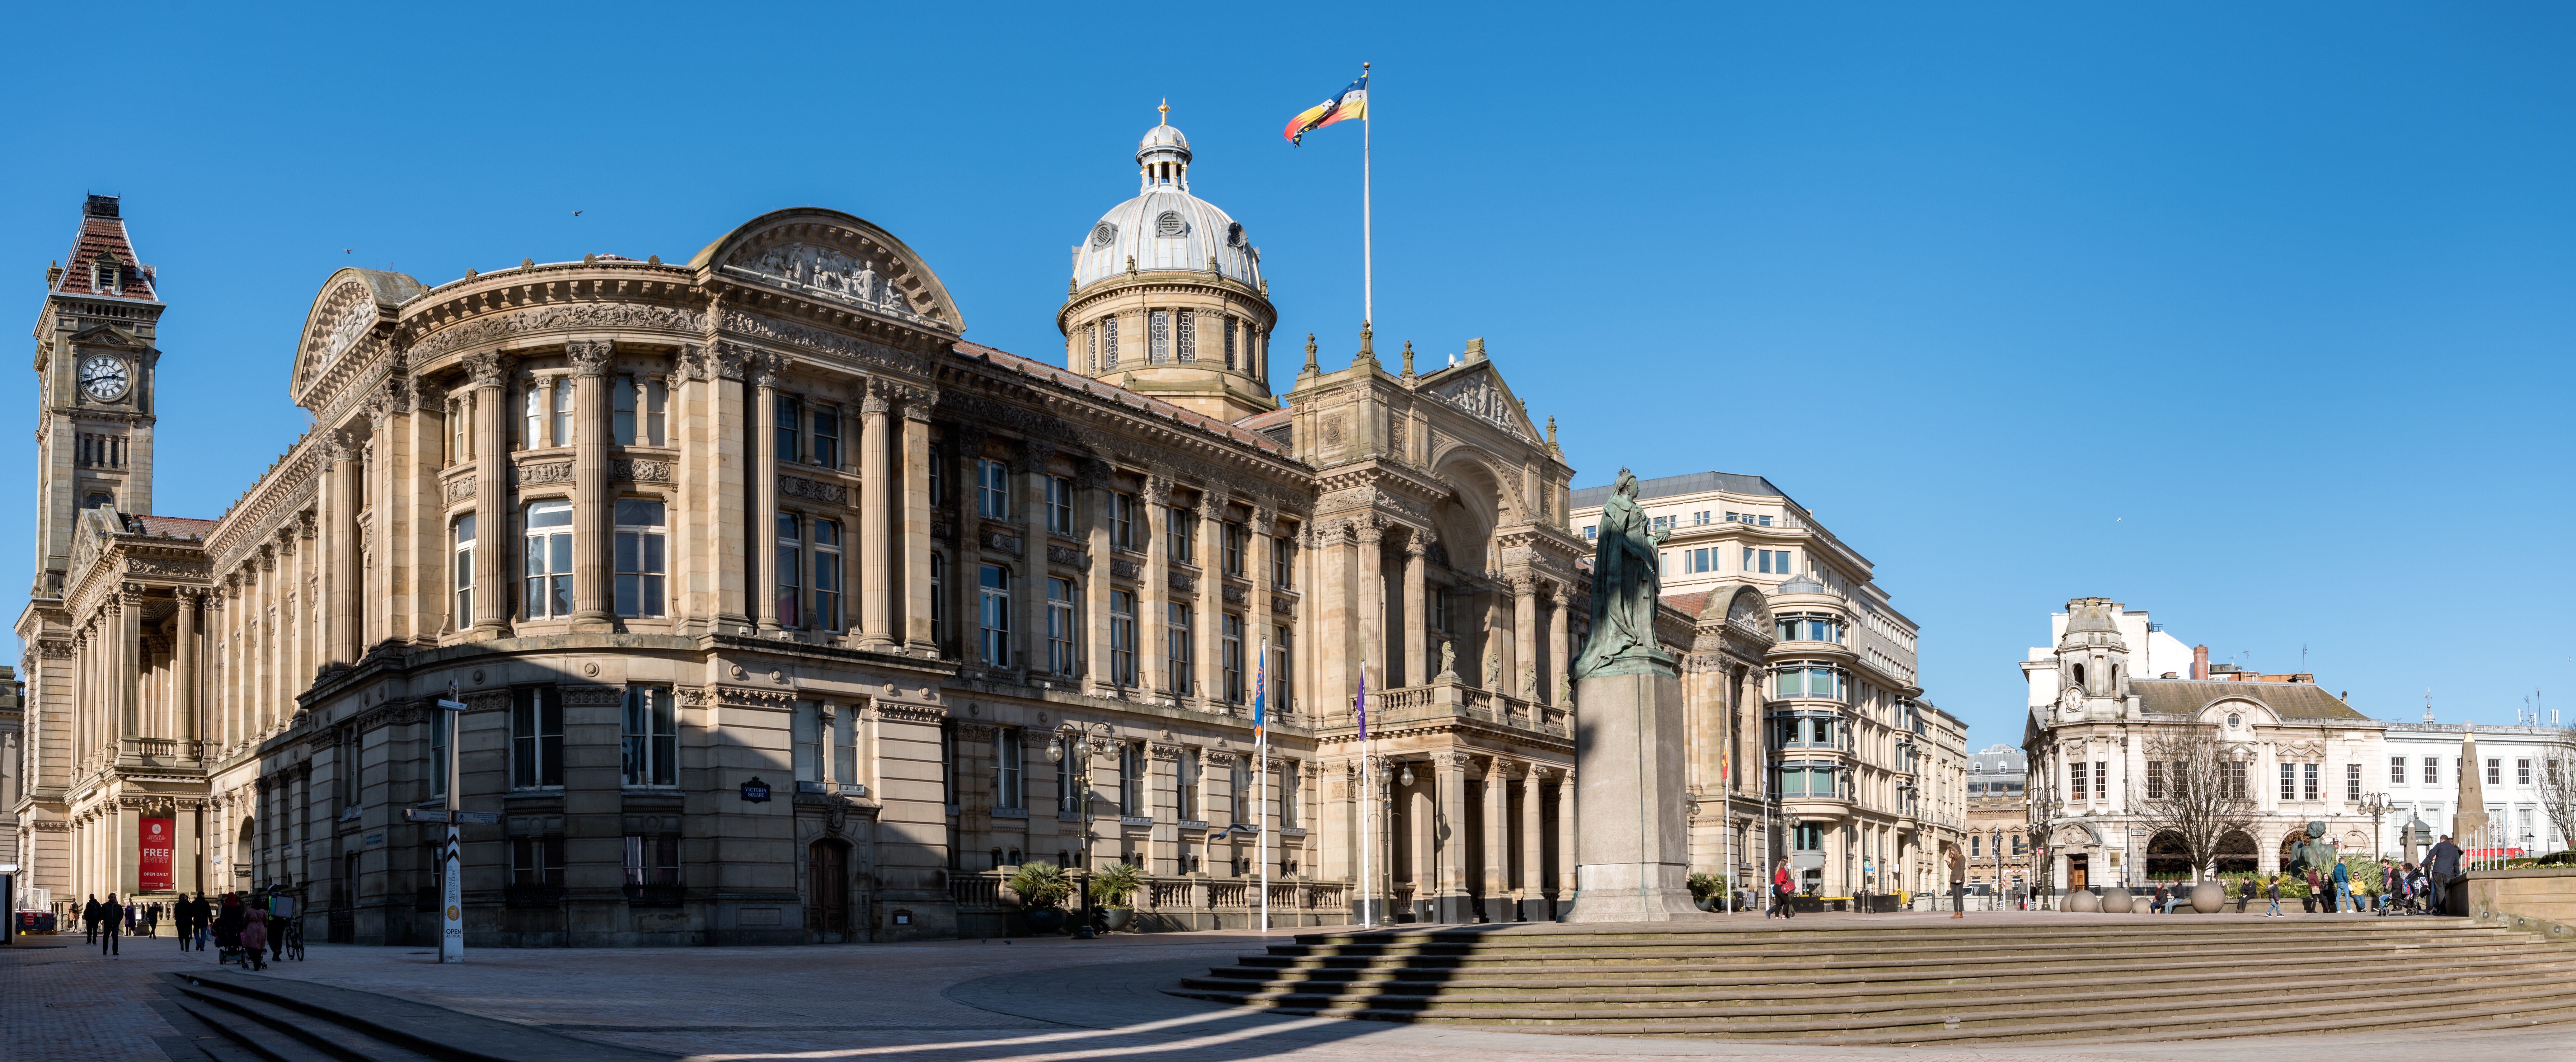 Legal challenge to Birmingham hospitality restrictions put on hold 